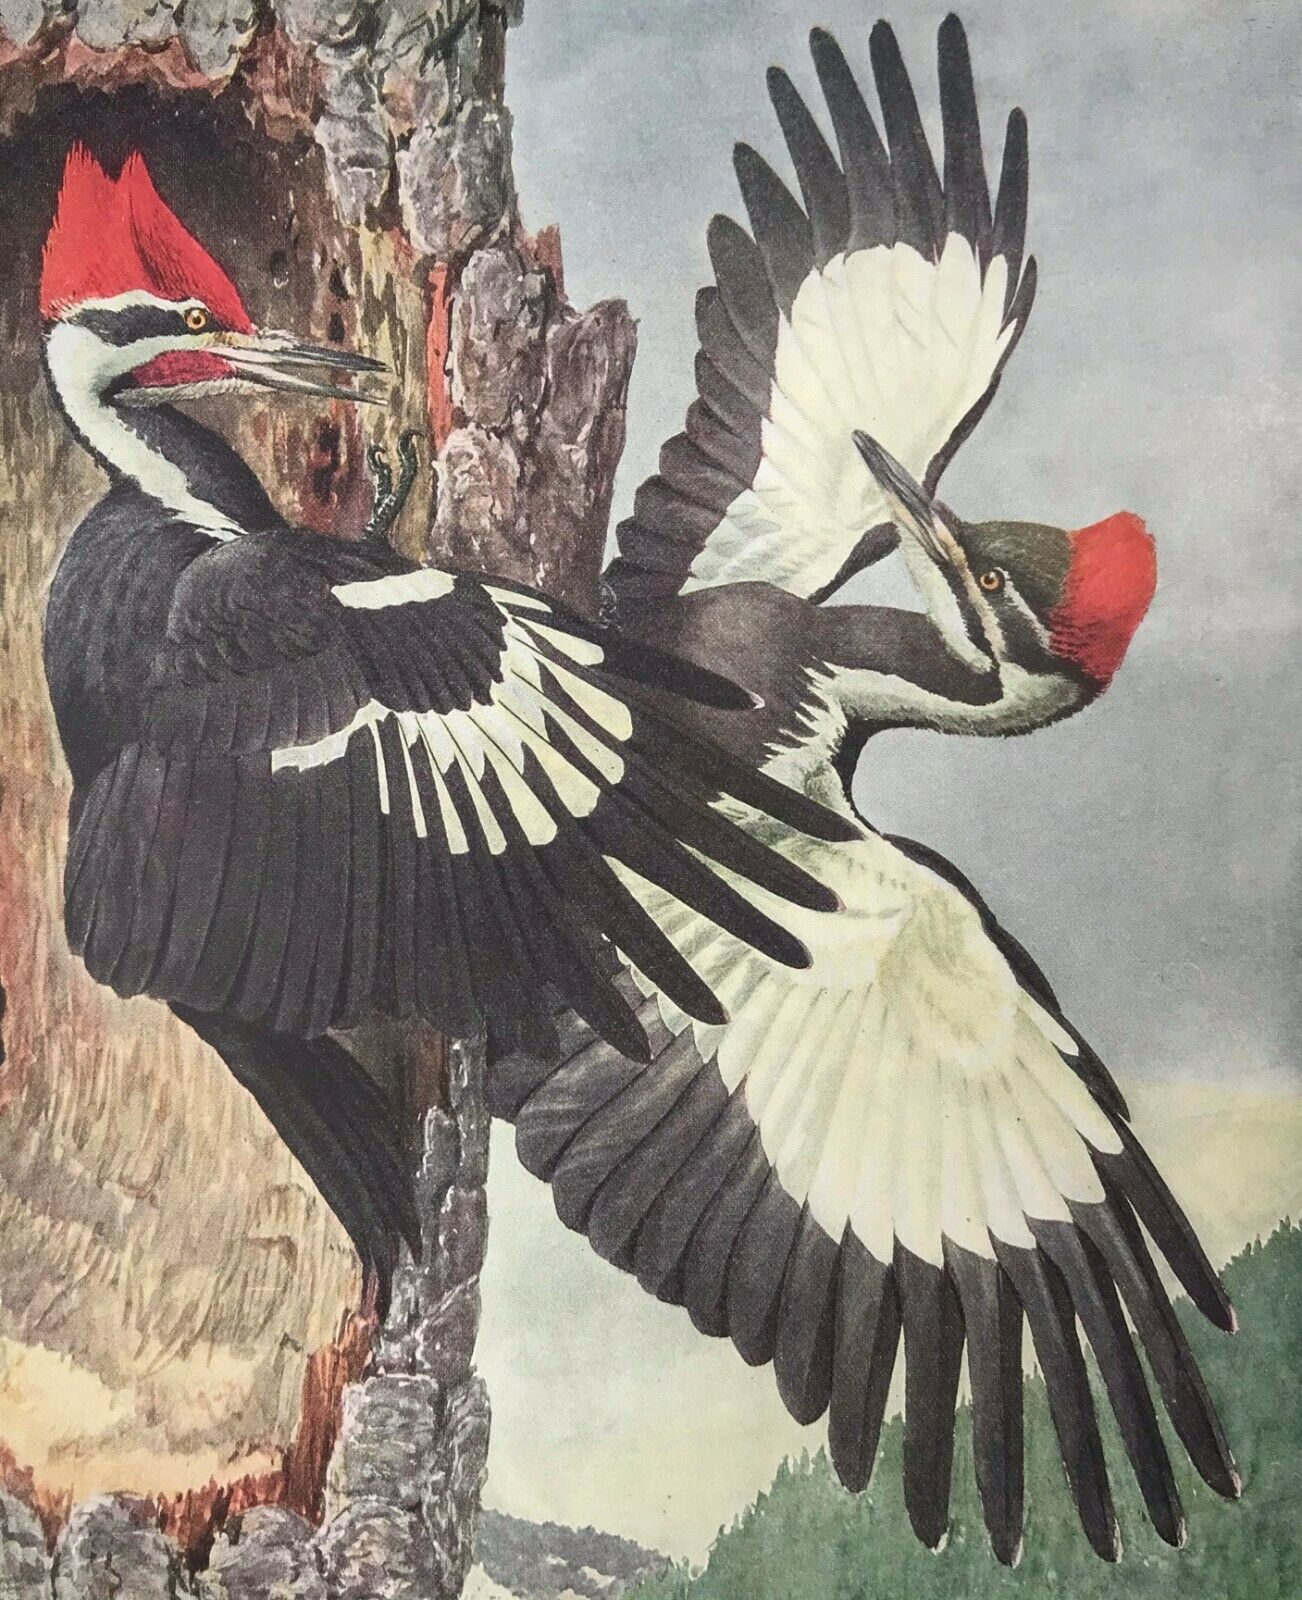 1915 Louis A. Fuertes Lithograph Print Northern Pileated Woodpecker 2v1-68 Et